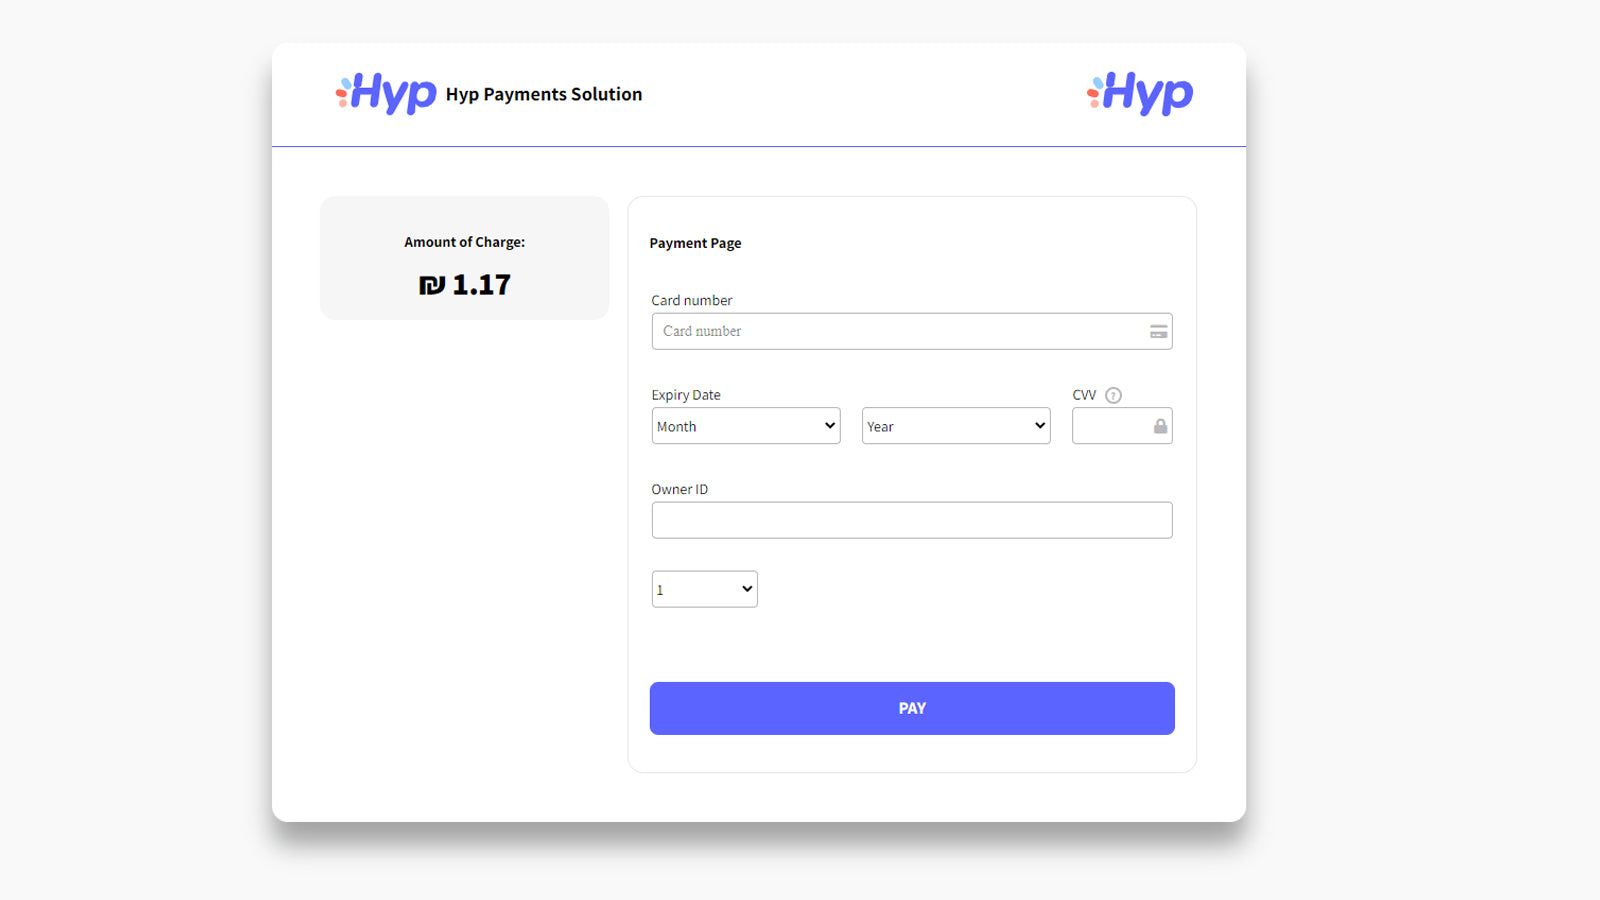 Hyp Payment Page in English